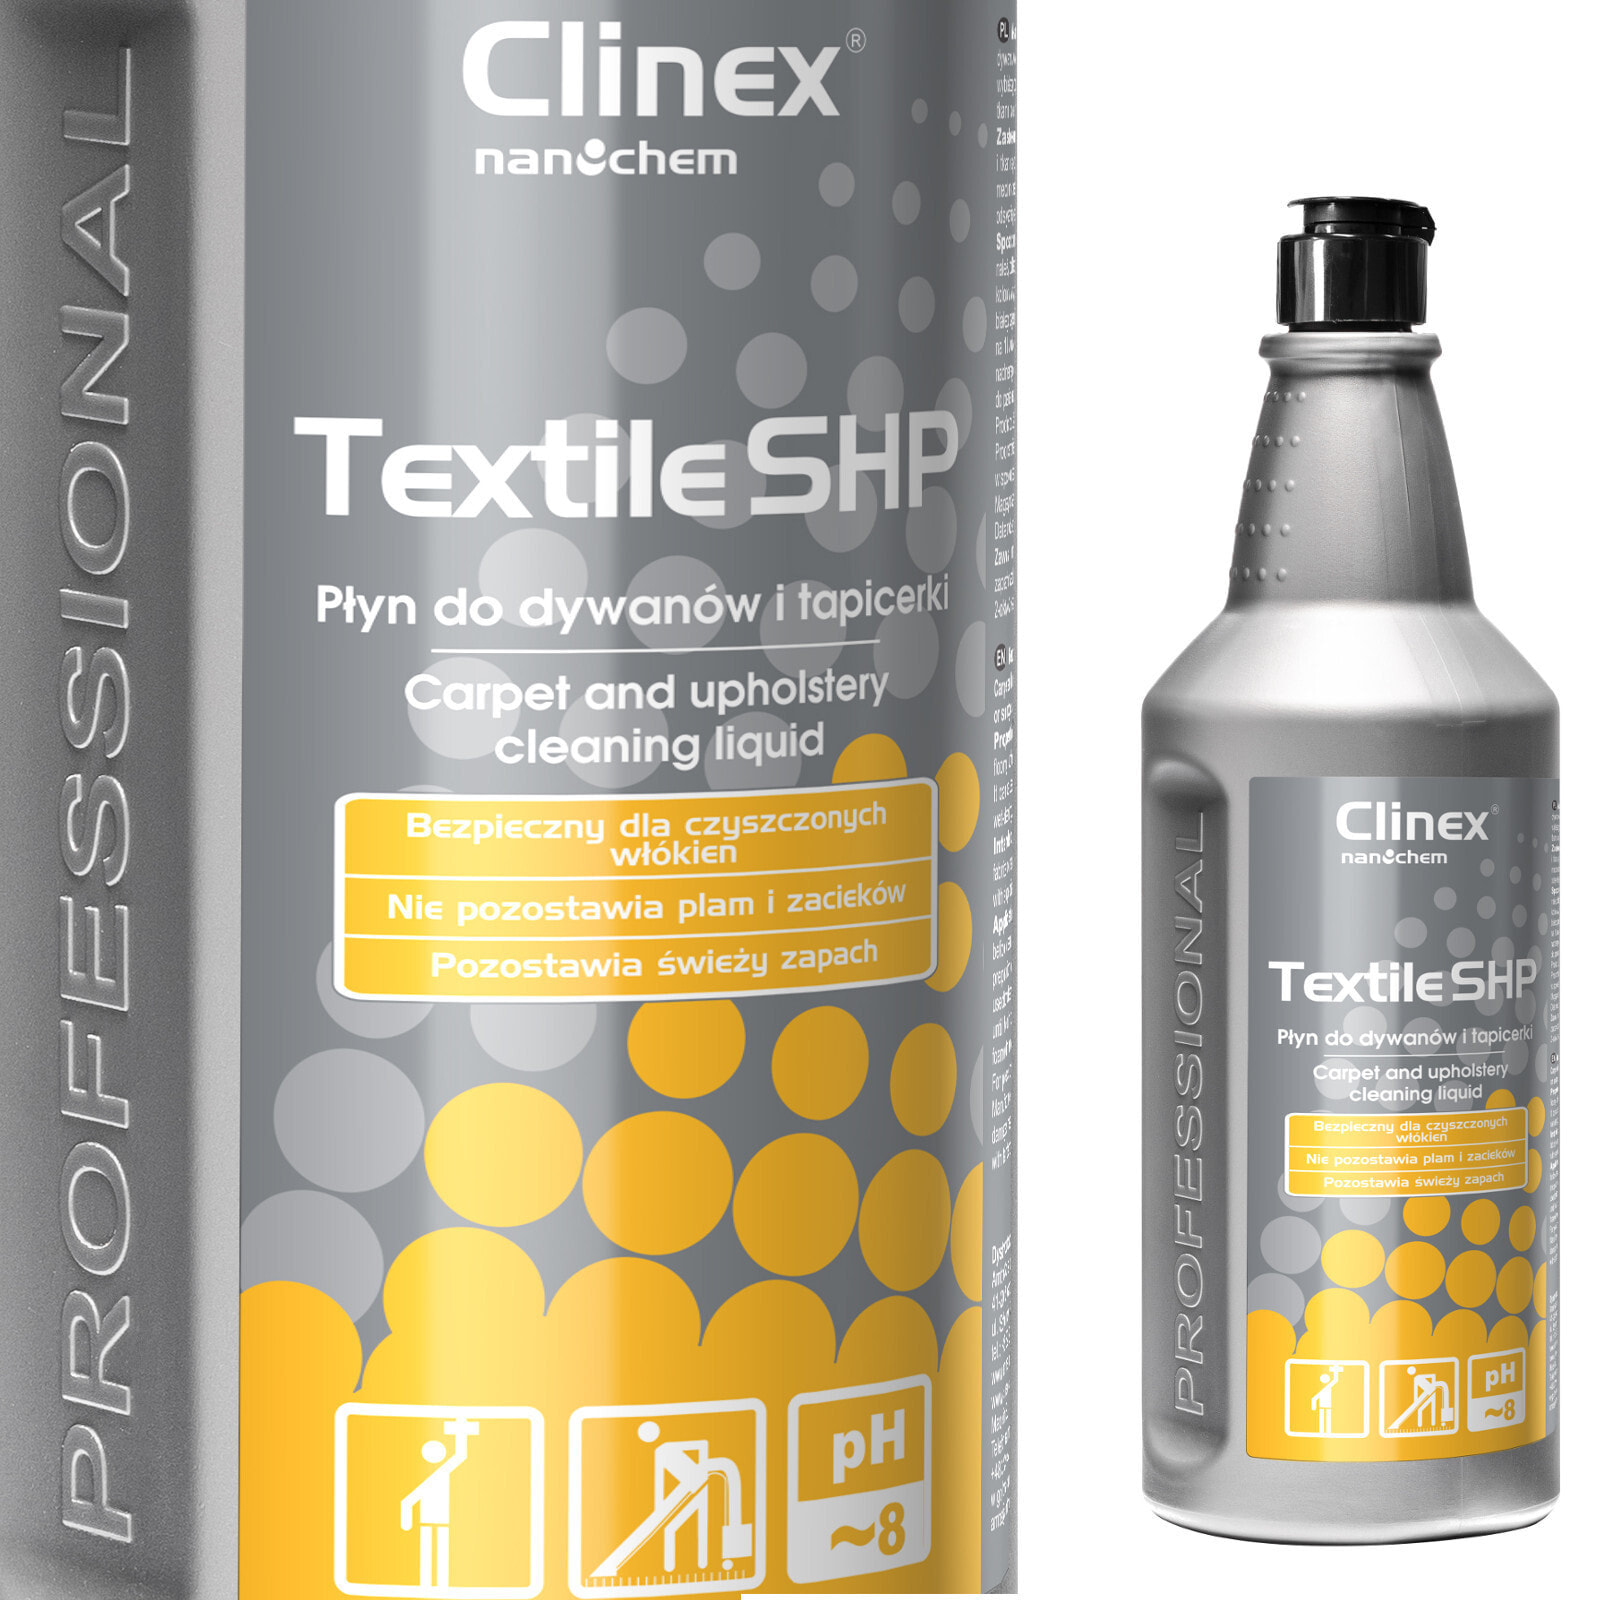 CLINEX Textile SHP 1L washing liquid for cleaning carpets, furniture and upholstery